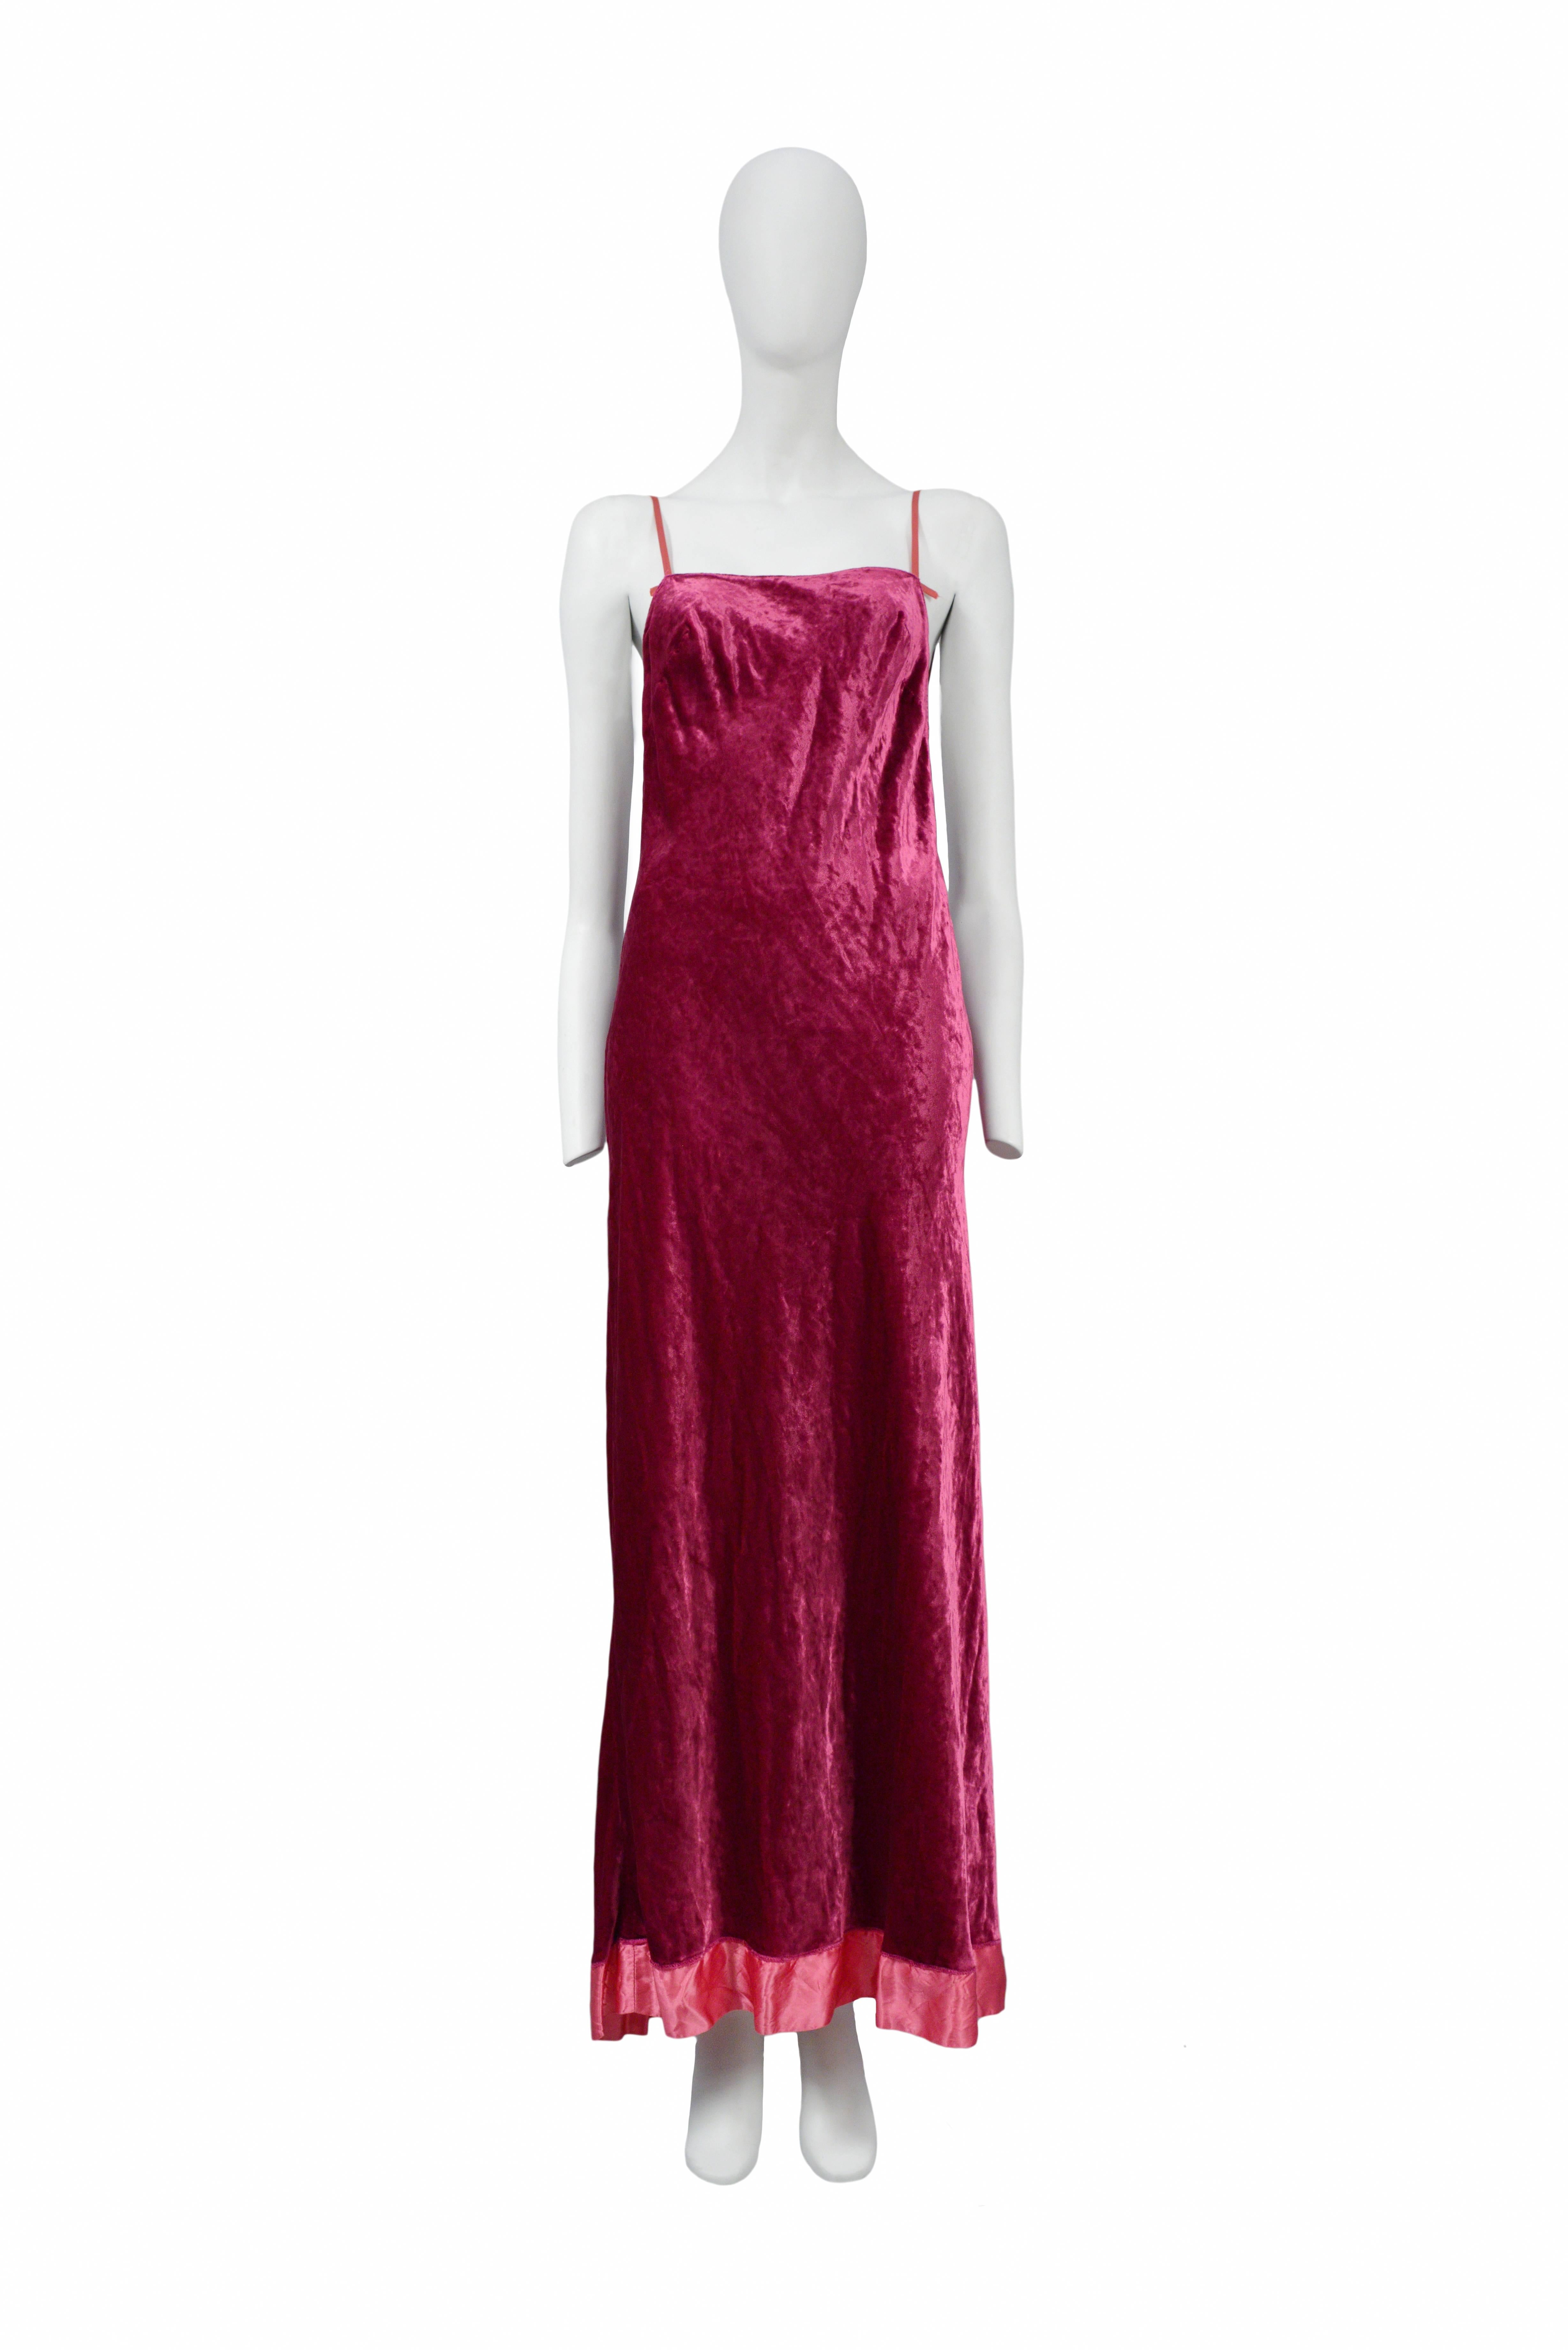 Vintage Maison Martin Margiela iconic pink velvet slip dress featuring satin straps, an open back and pink satin trim at the hem. Circa 1995.
Please inquire for additional images.